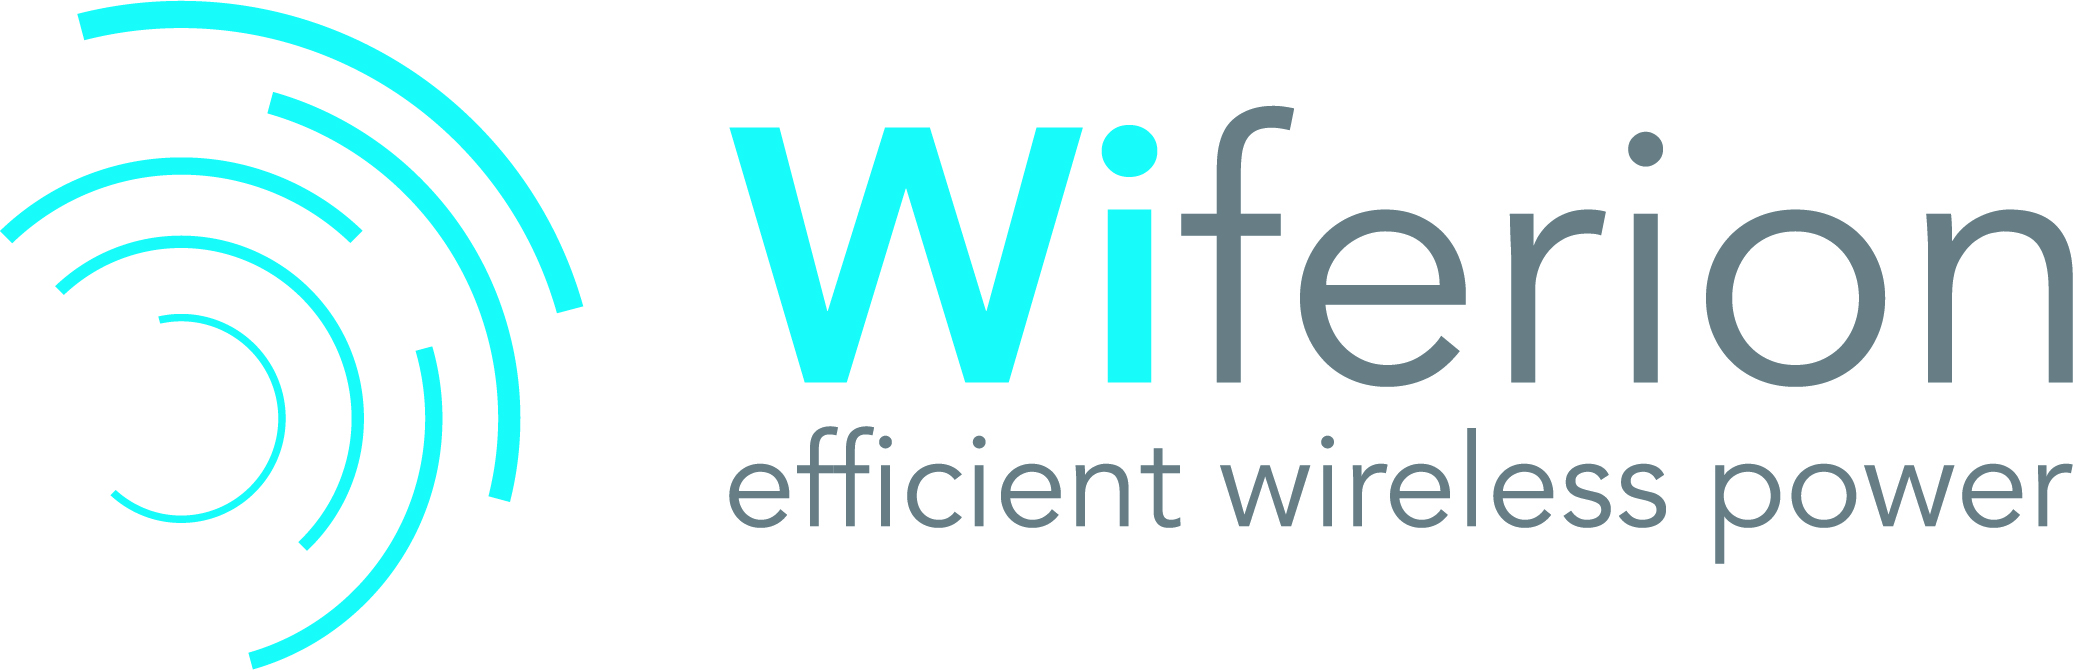 ProMatDX Features Best New Product Innovation Award Finalist Wiferion 